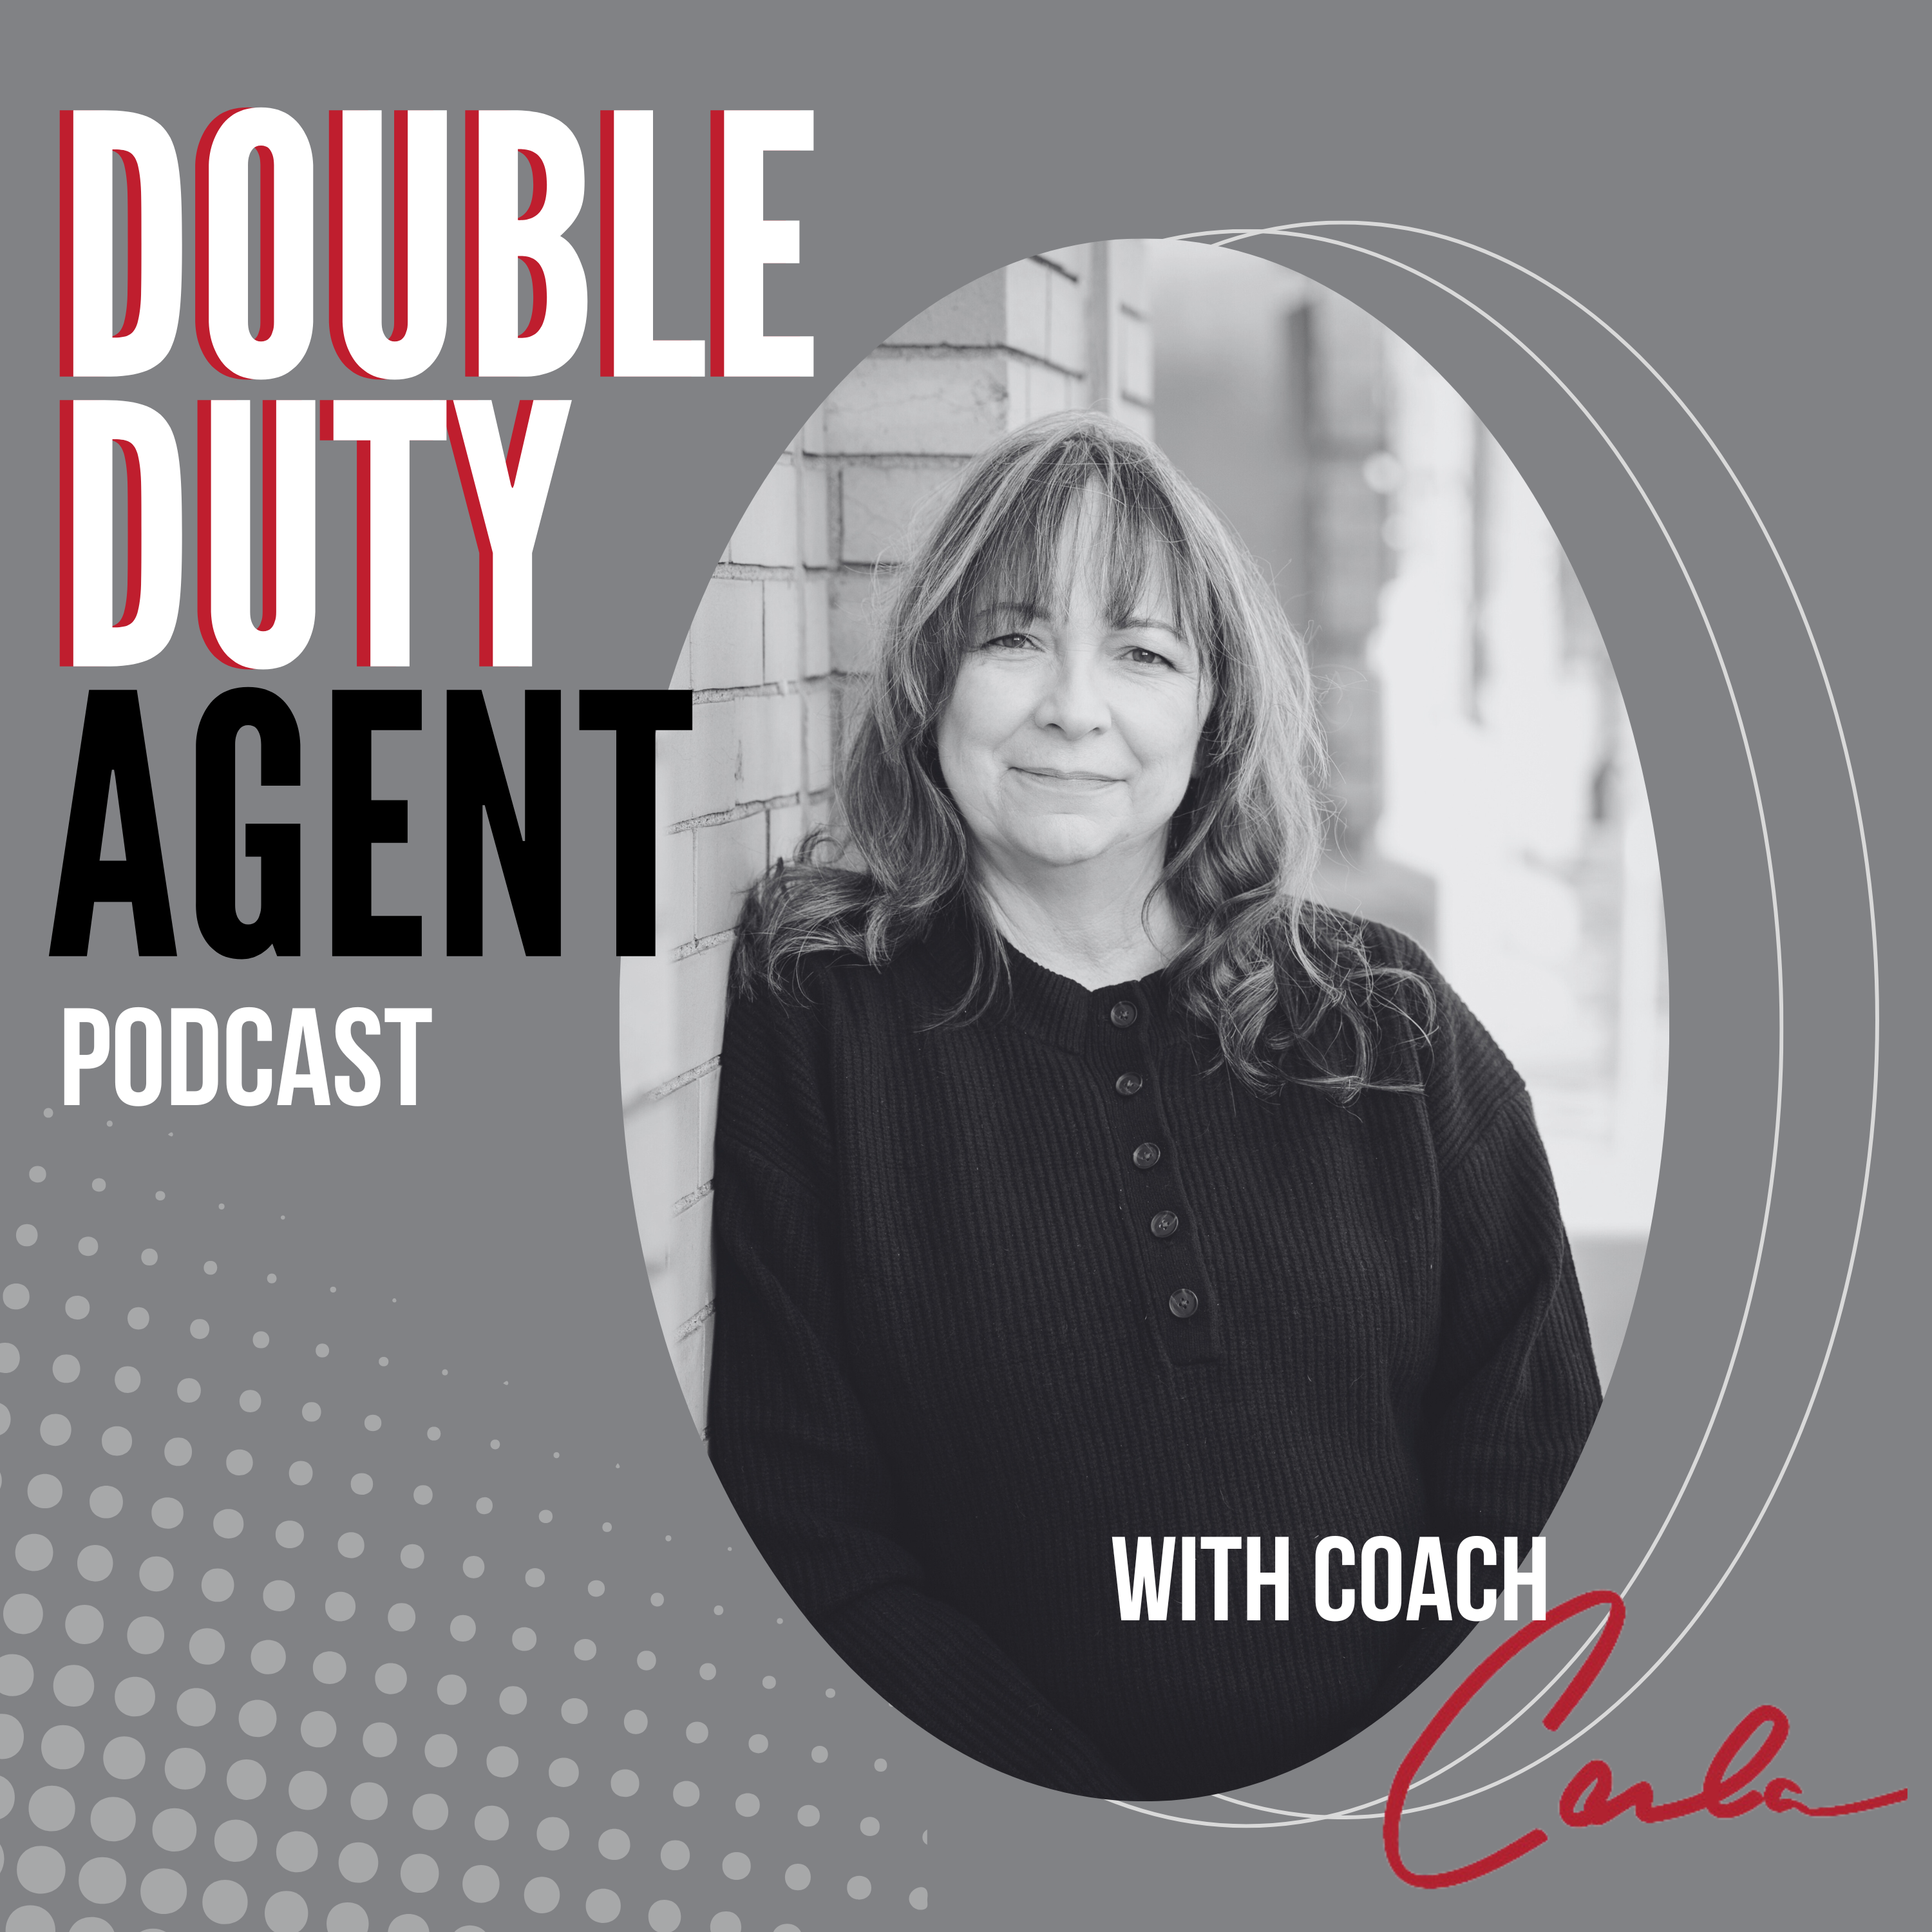 The Double Duty Agent Podcast with Carla Higgins